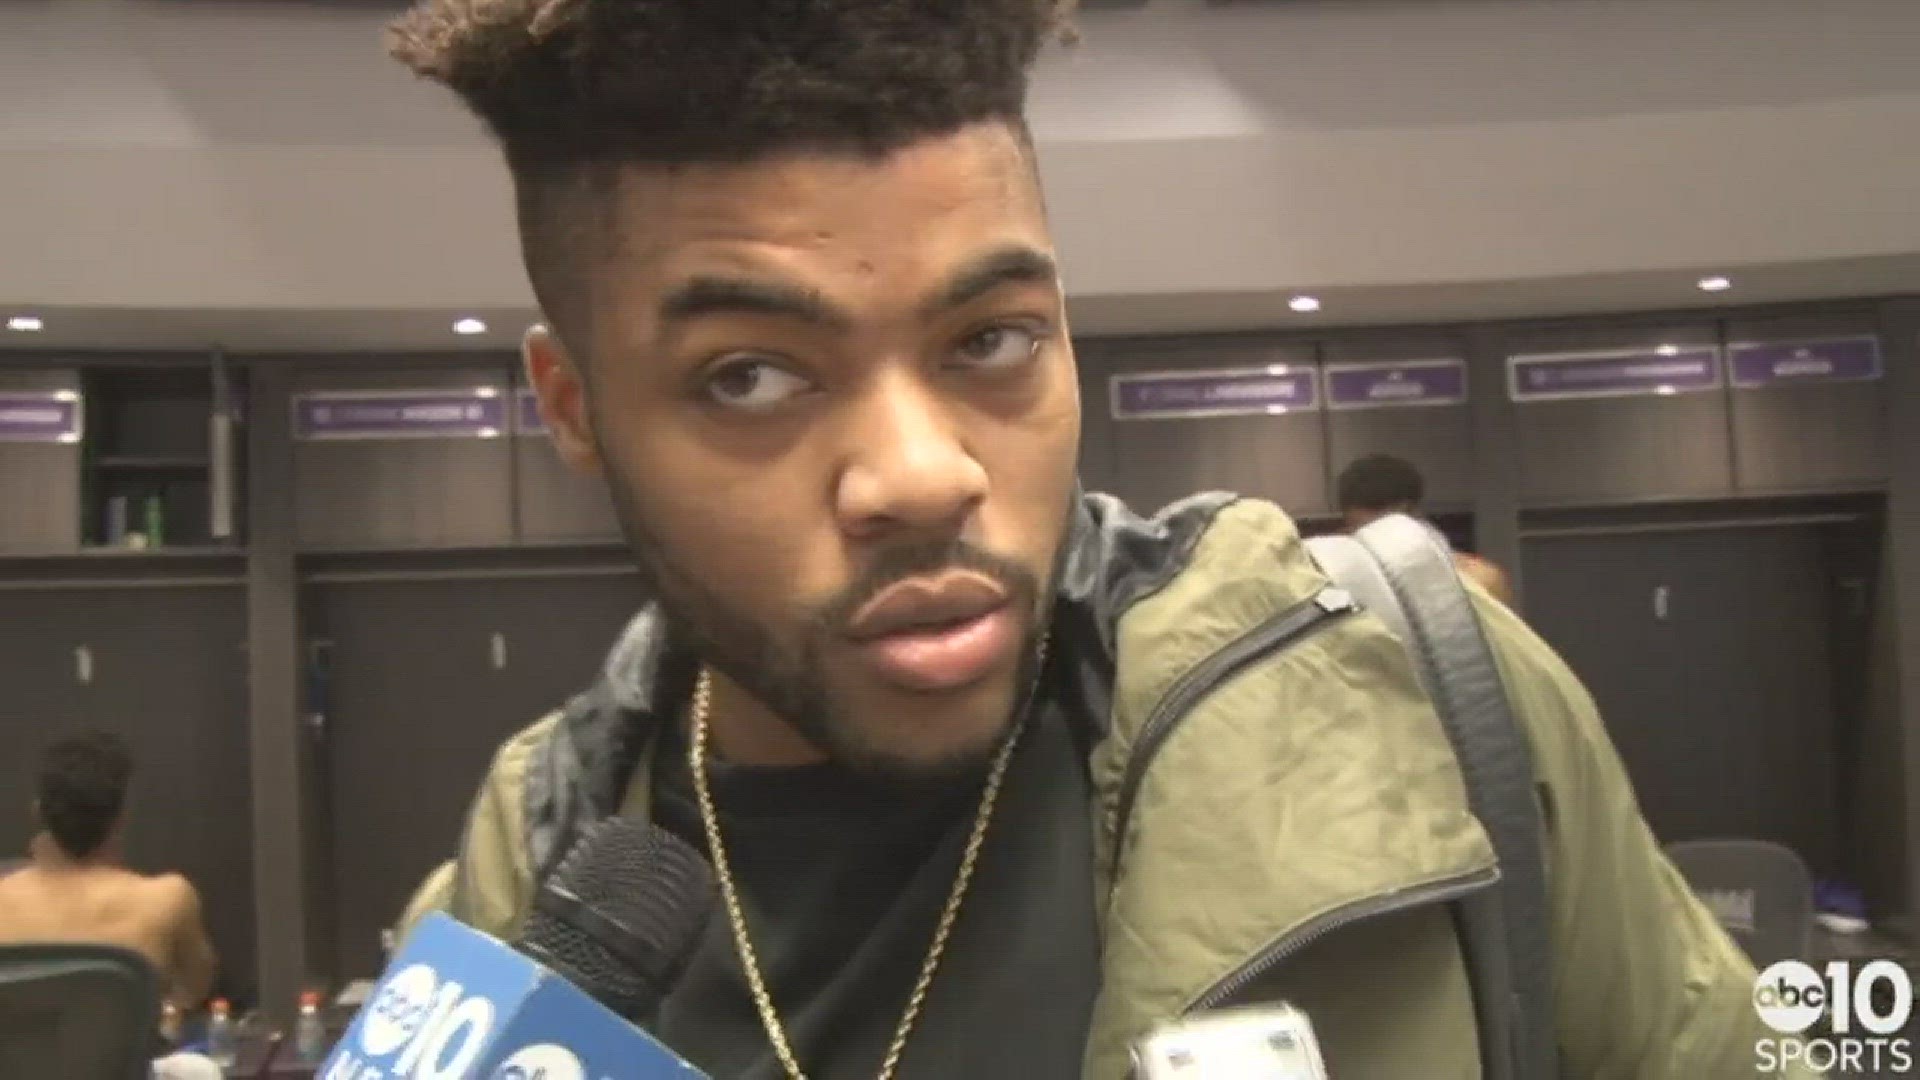 Kings rookie Frank Mason III discusses Tuesday's lop-sided loss at home to the Milwaukee Bucks, which came on night after Sacramento beat the Warriors in Oakland.